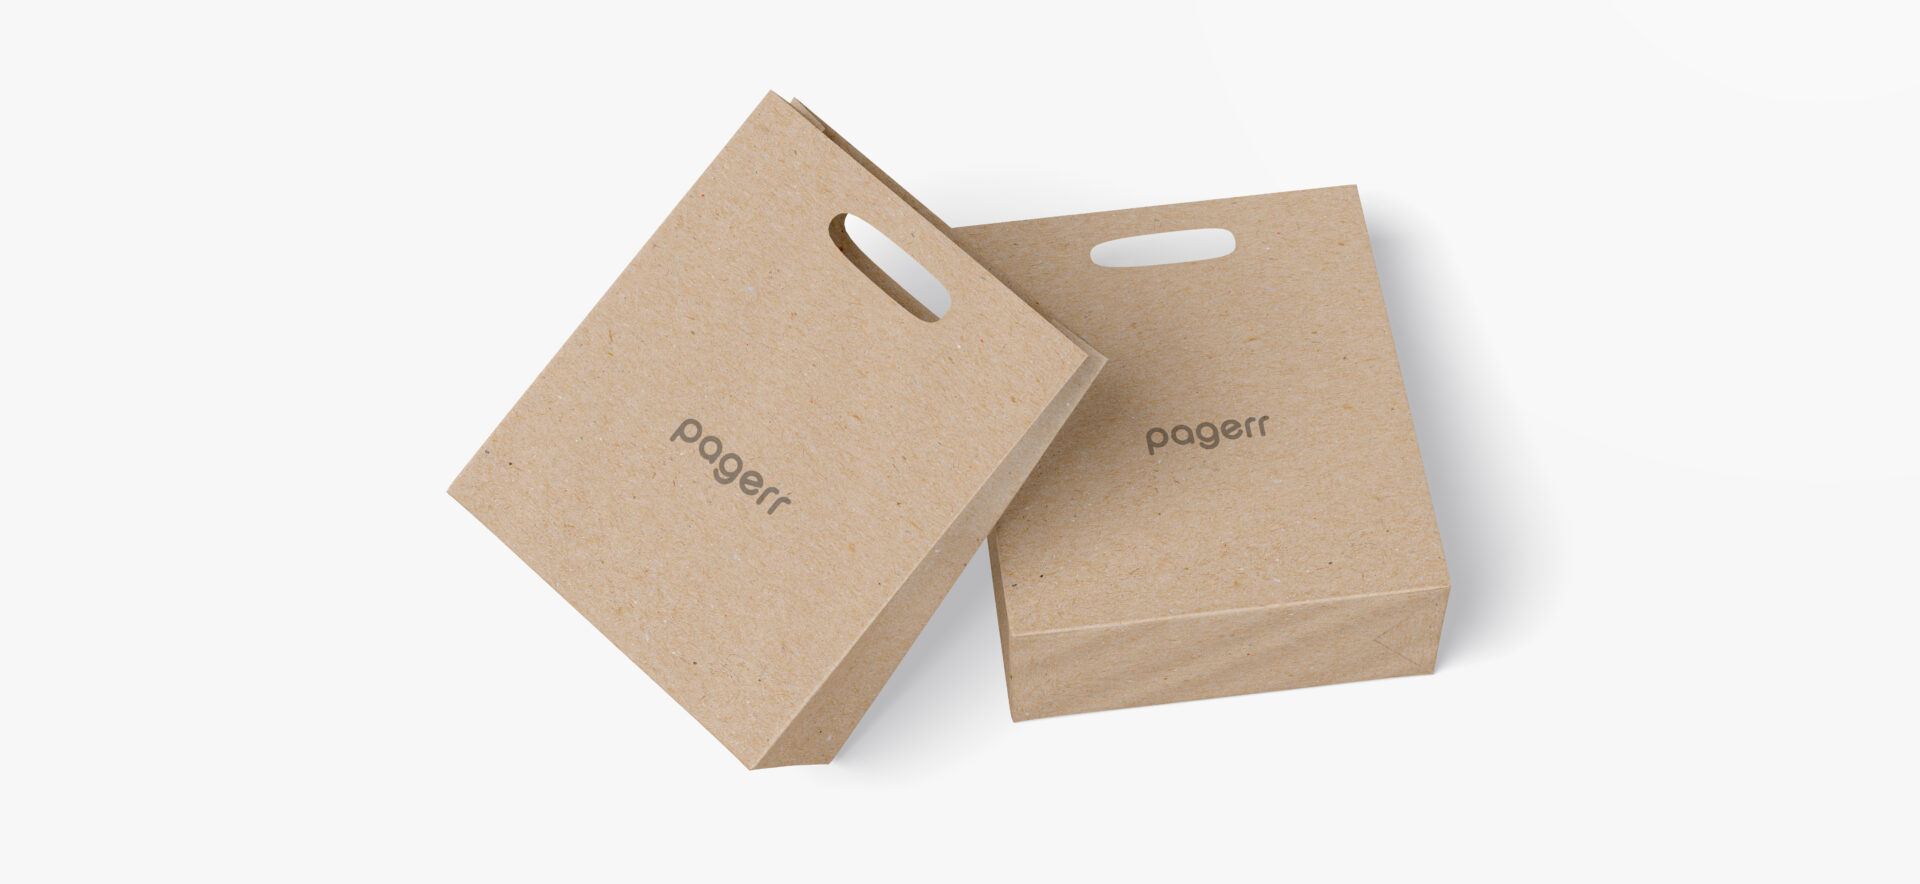 Takeaway bags in Canberra - Print with Pagerr